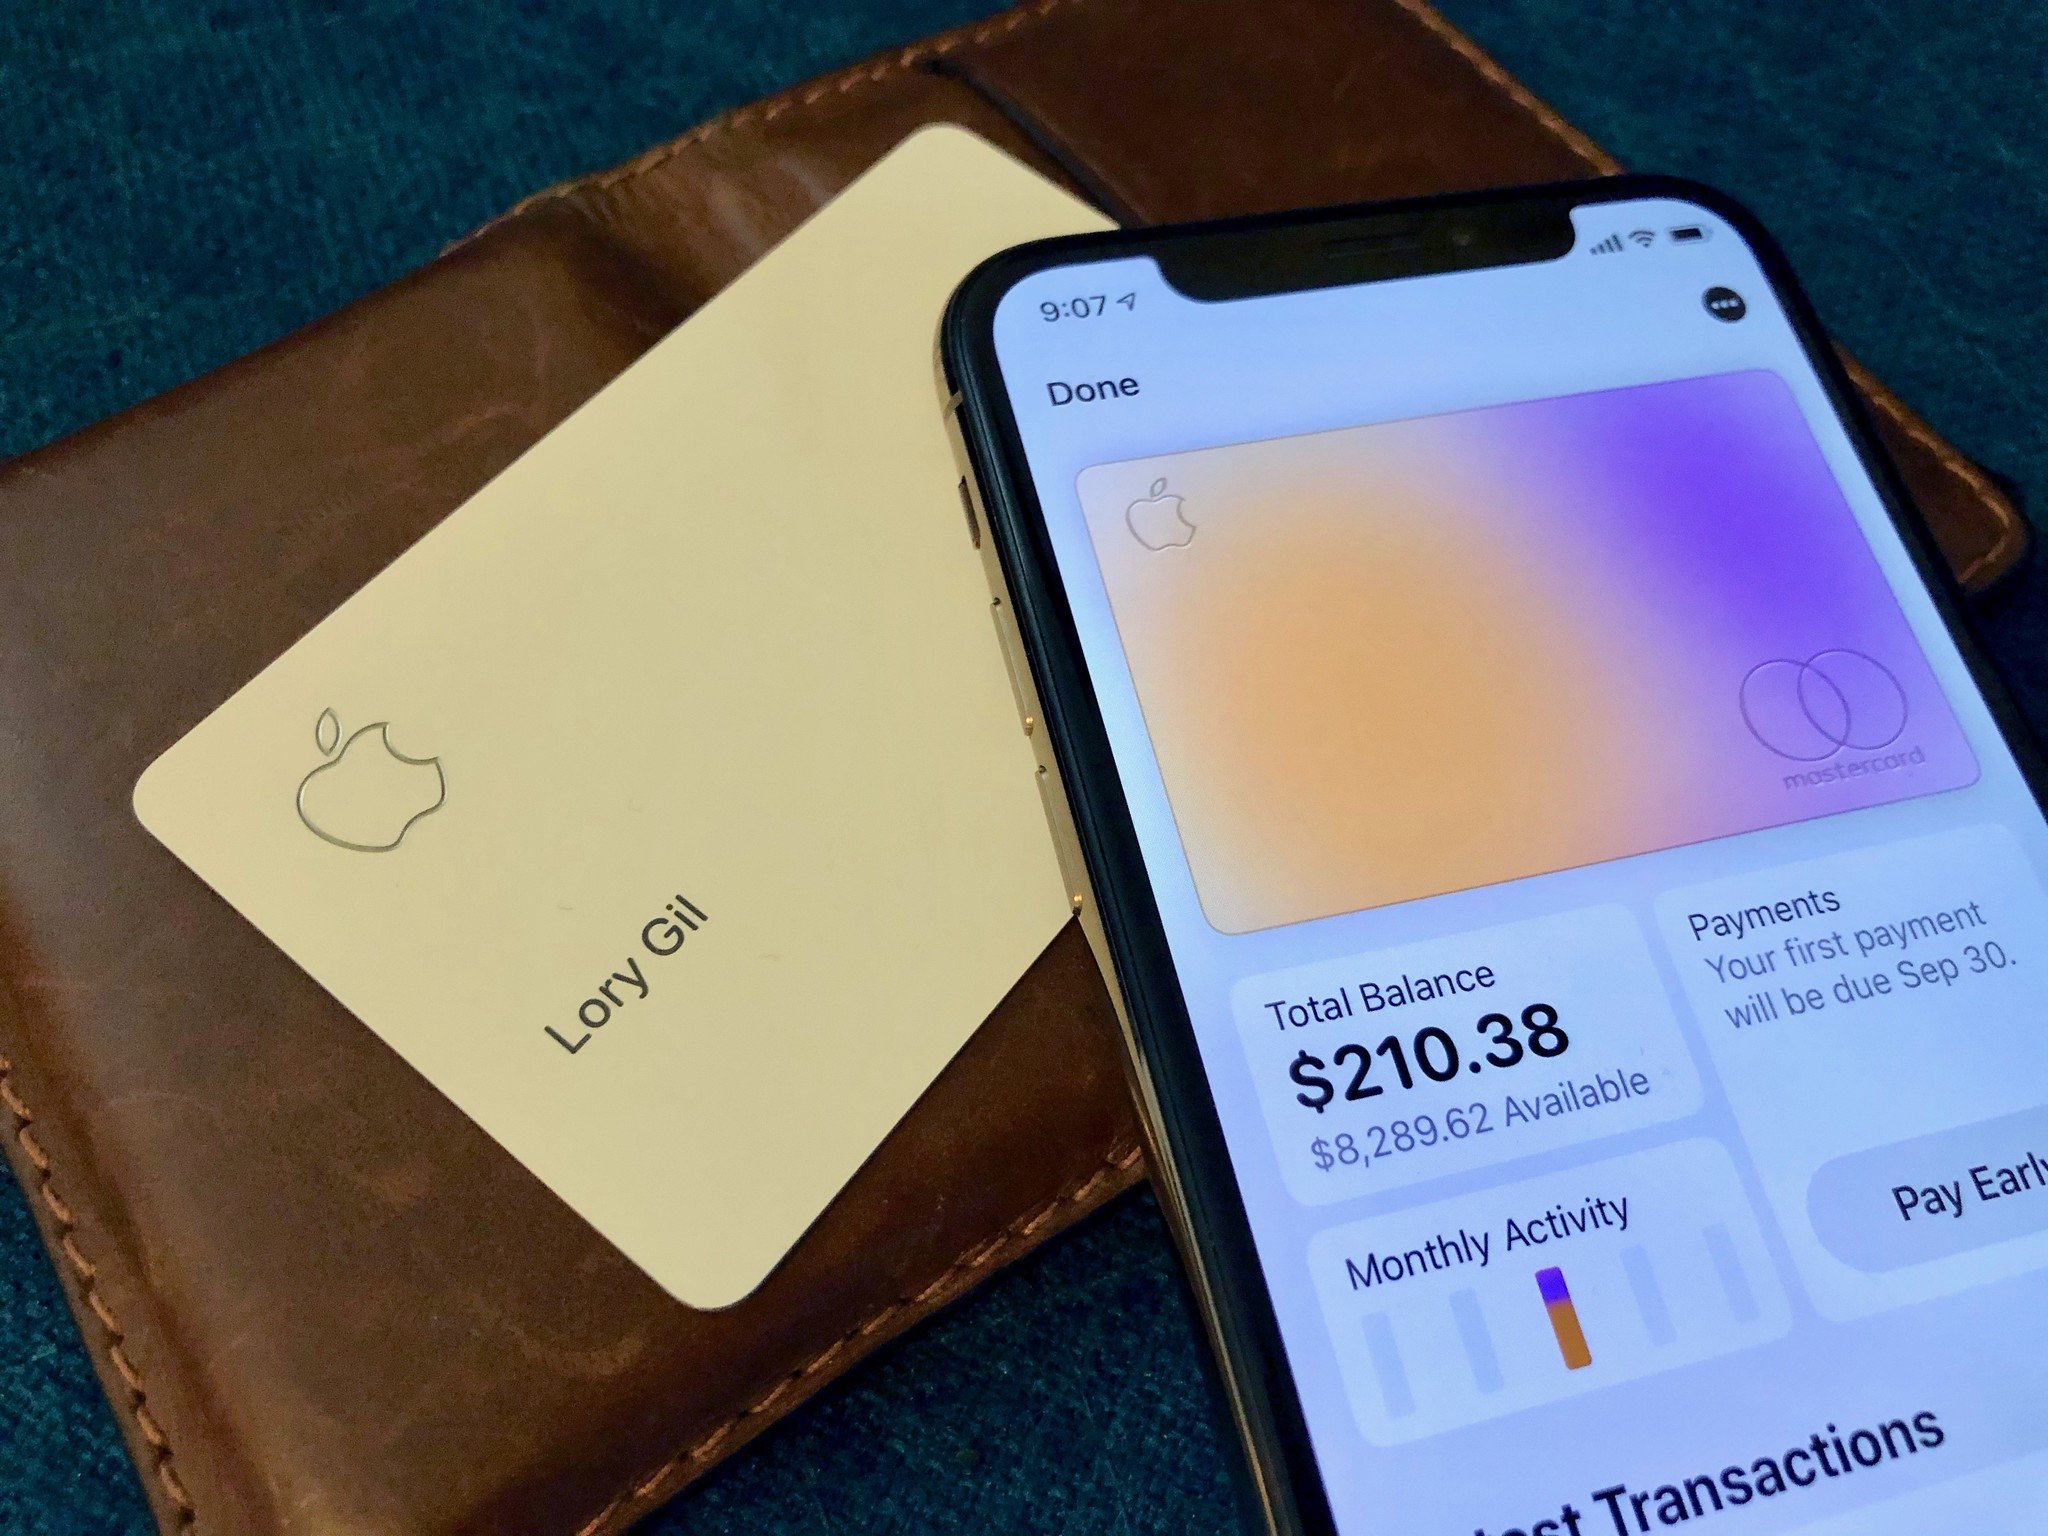 Apple Card on iPhone XS and physical titanium card